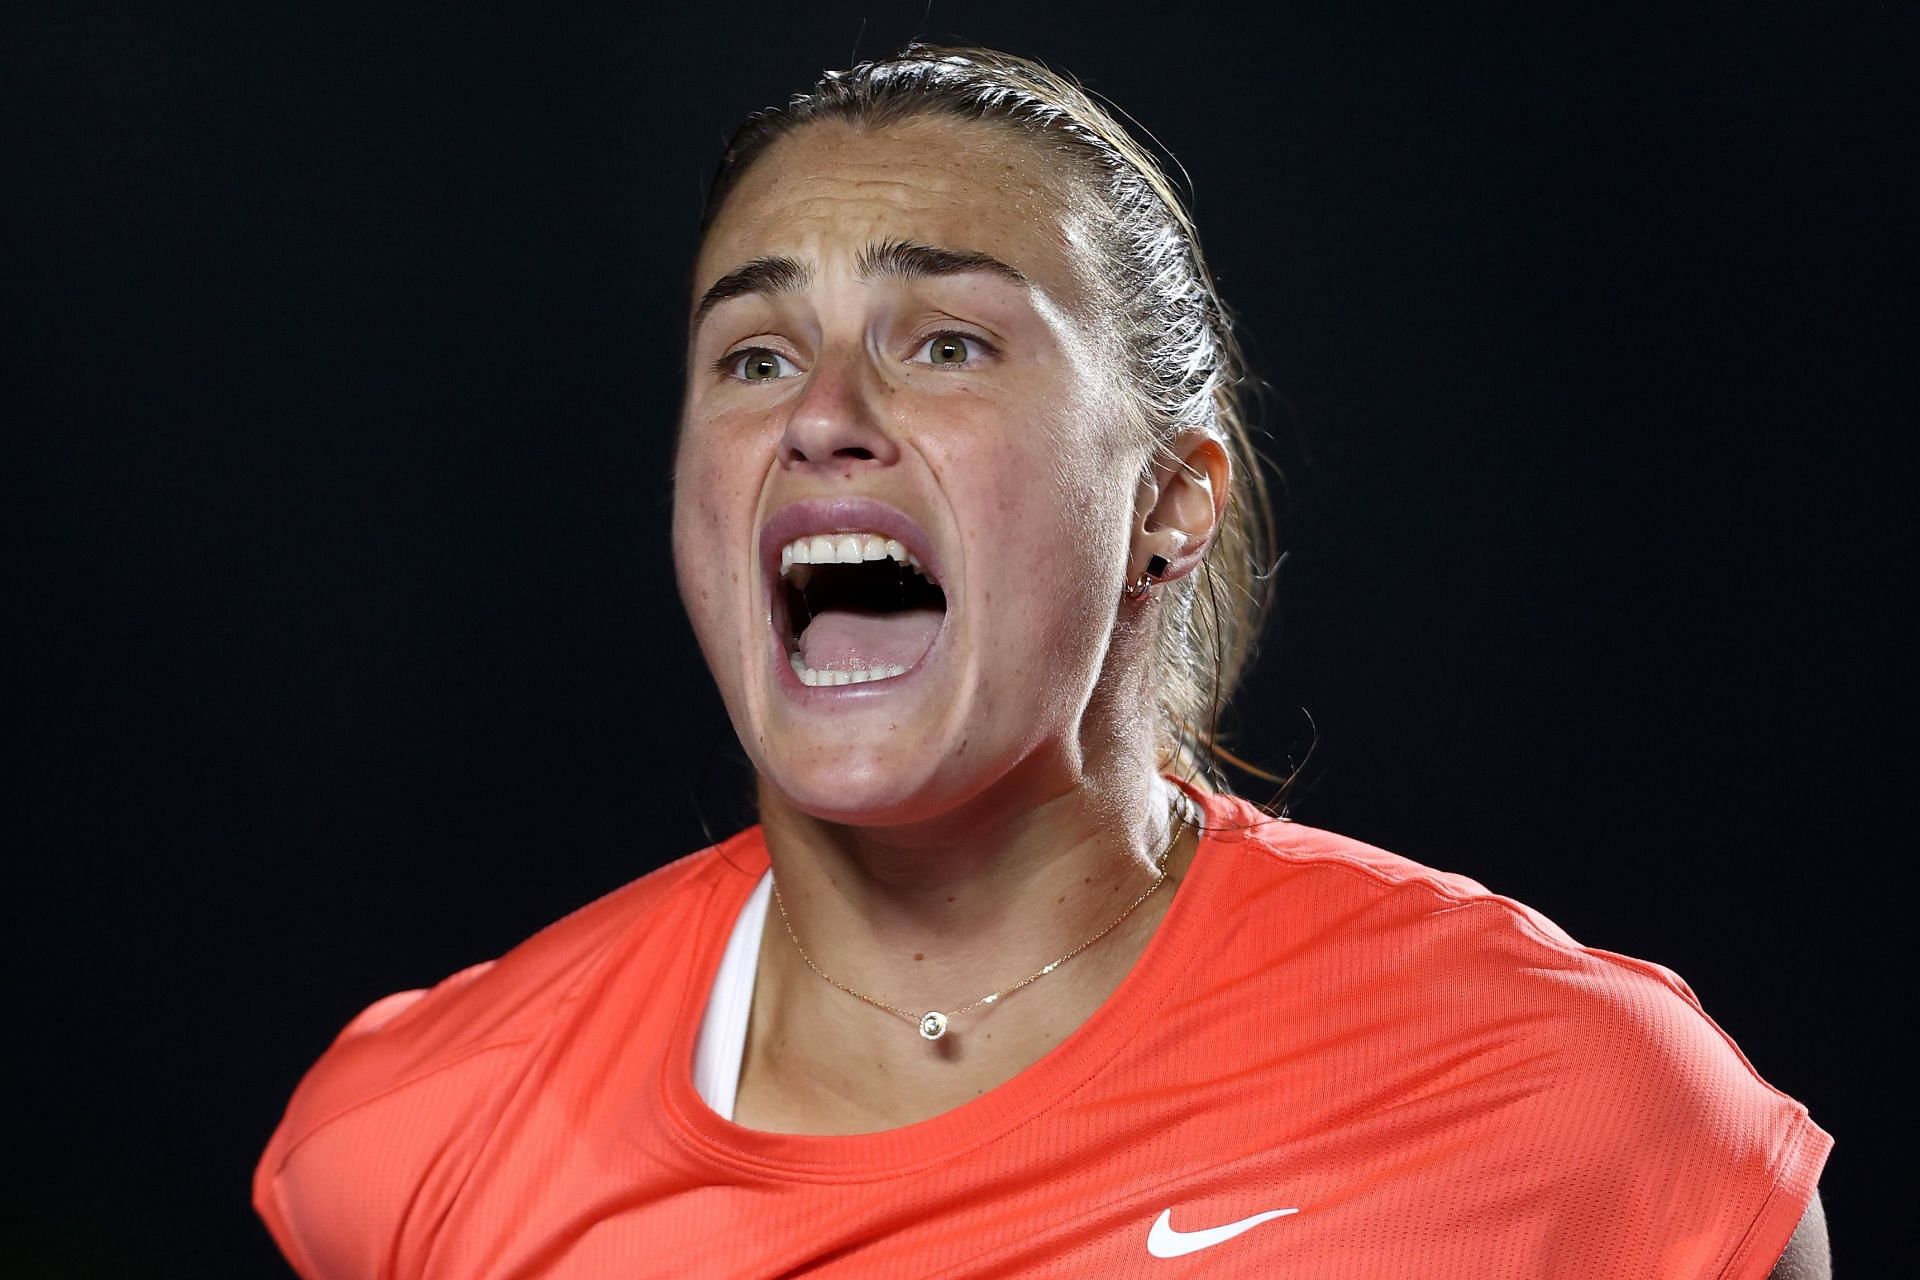 Aryna Sabalenka reacts during her match against Iga Swiatek at the 2021 WTA Finals